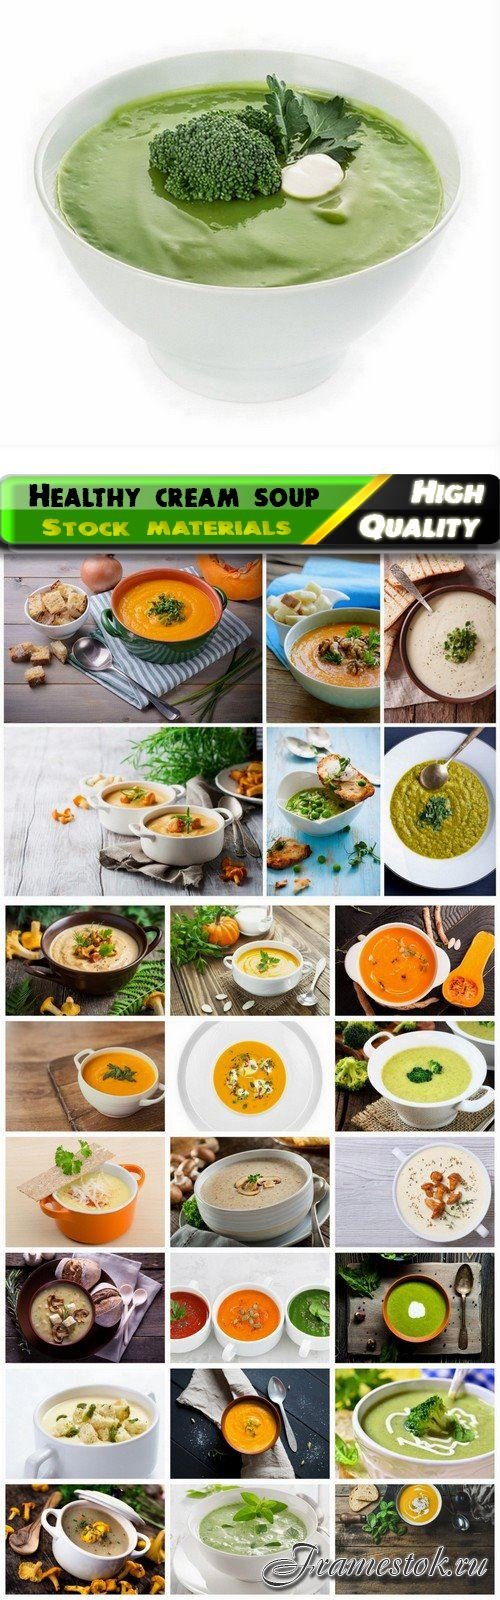 Healthy diet cream soup cooked from fresh vegetables - 25 HQ Jpg